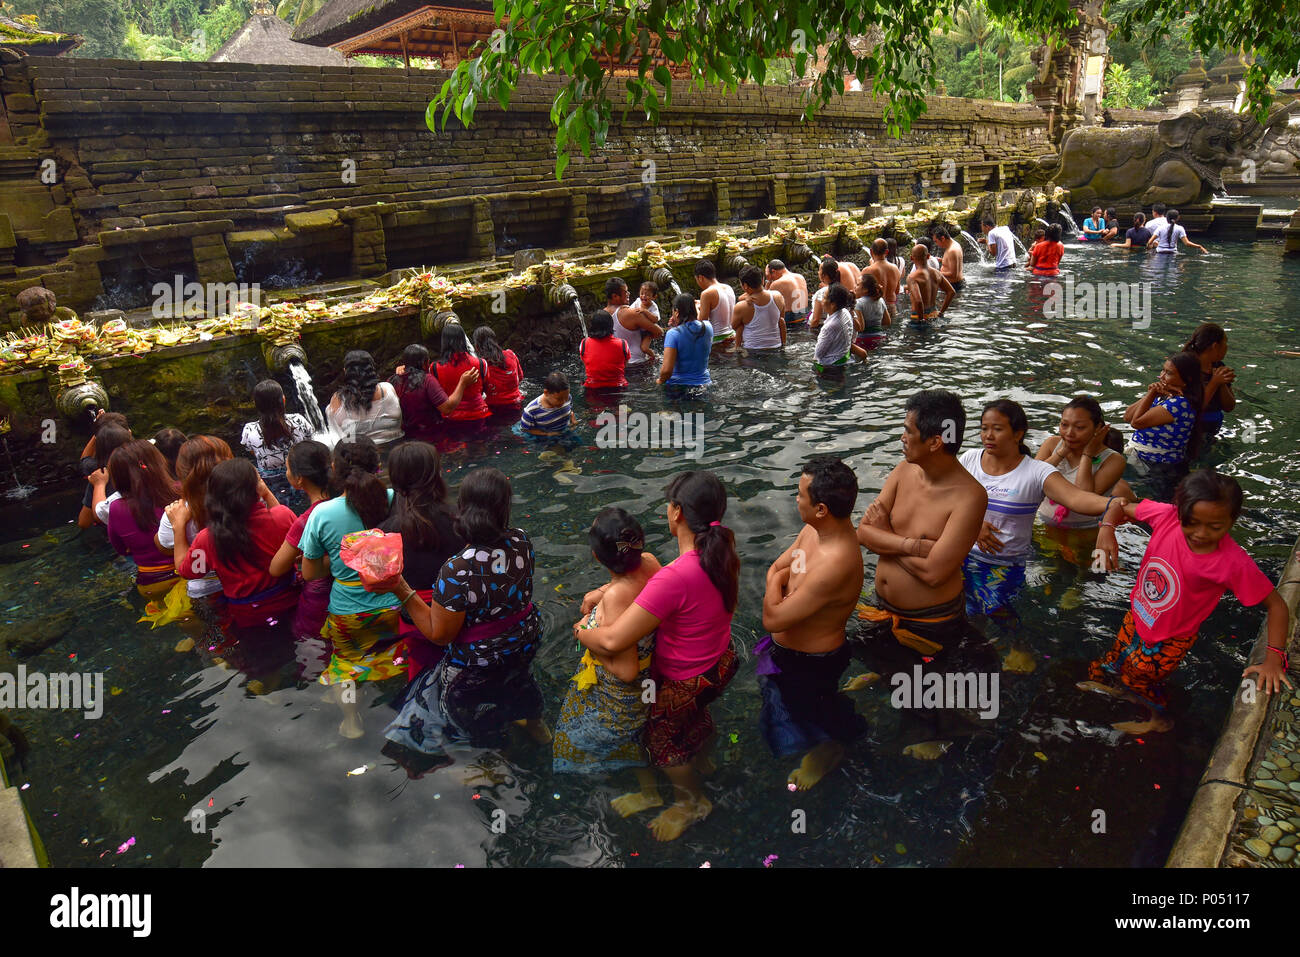 Pilgrims in the holy water pool in Pura Tirta Empul, a Hindu Balinese water temple in Bali, Indonesia Stock Photo